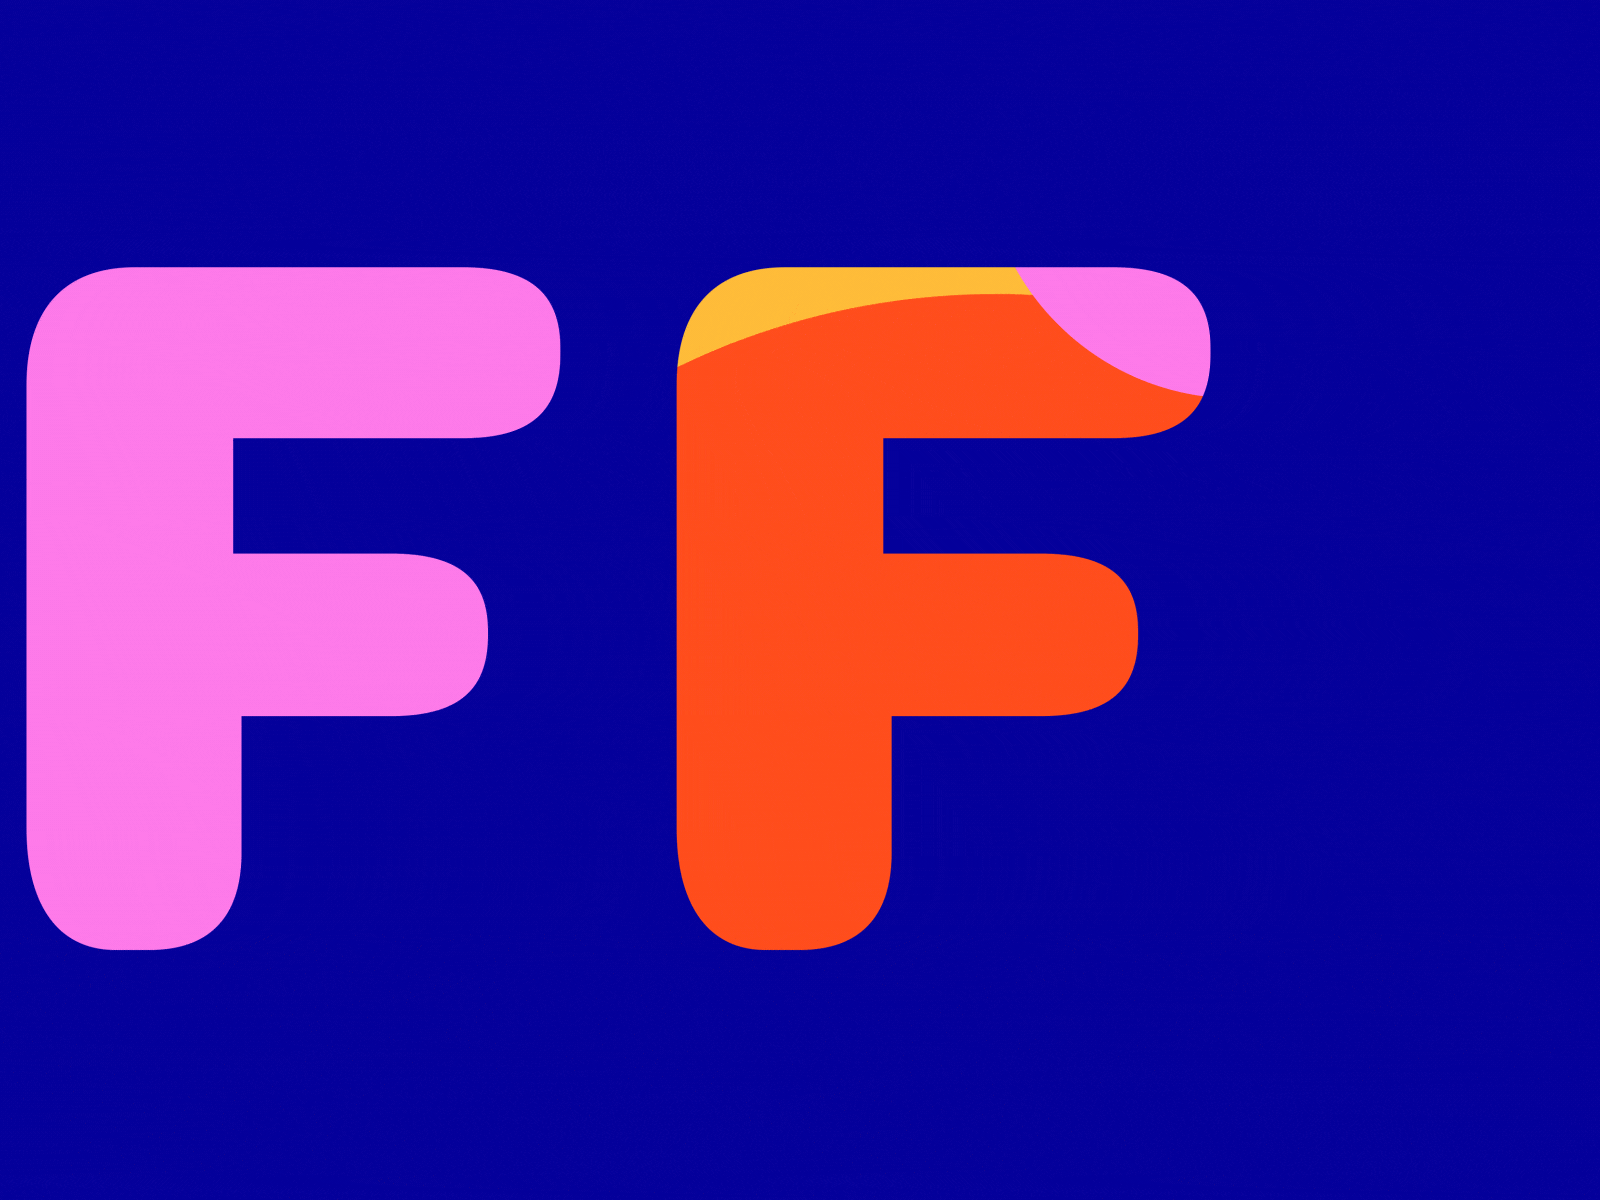 36 Days of Type - F 36 days of type 36daysoftype 36daysoftype08 ae after effects animated type animation animography colors design kinetic kinetic type kinetic typography motion motion design motion graphic motion graphics type typography